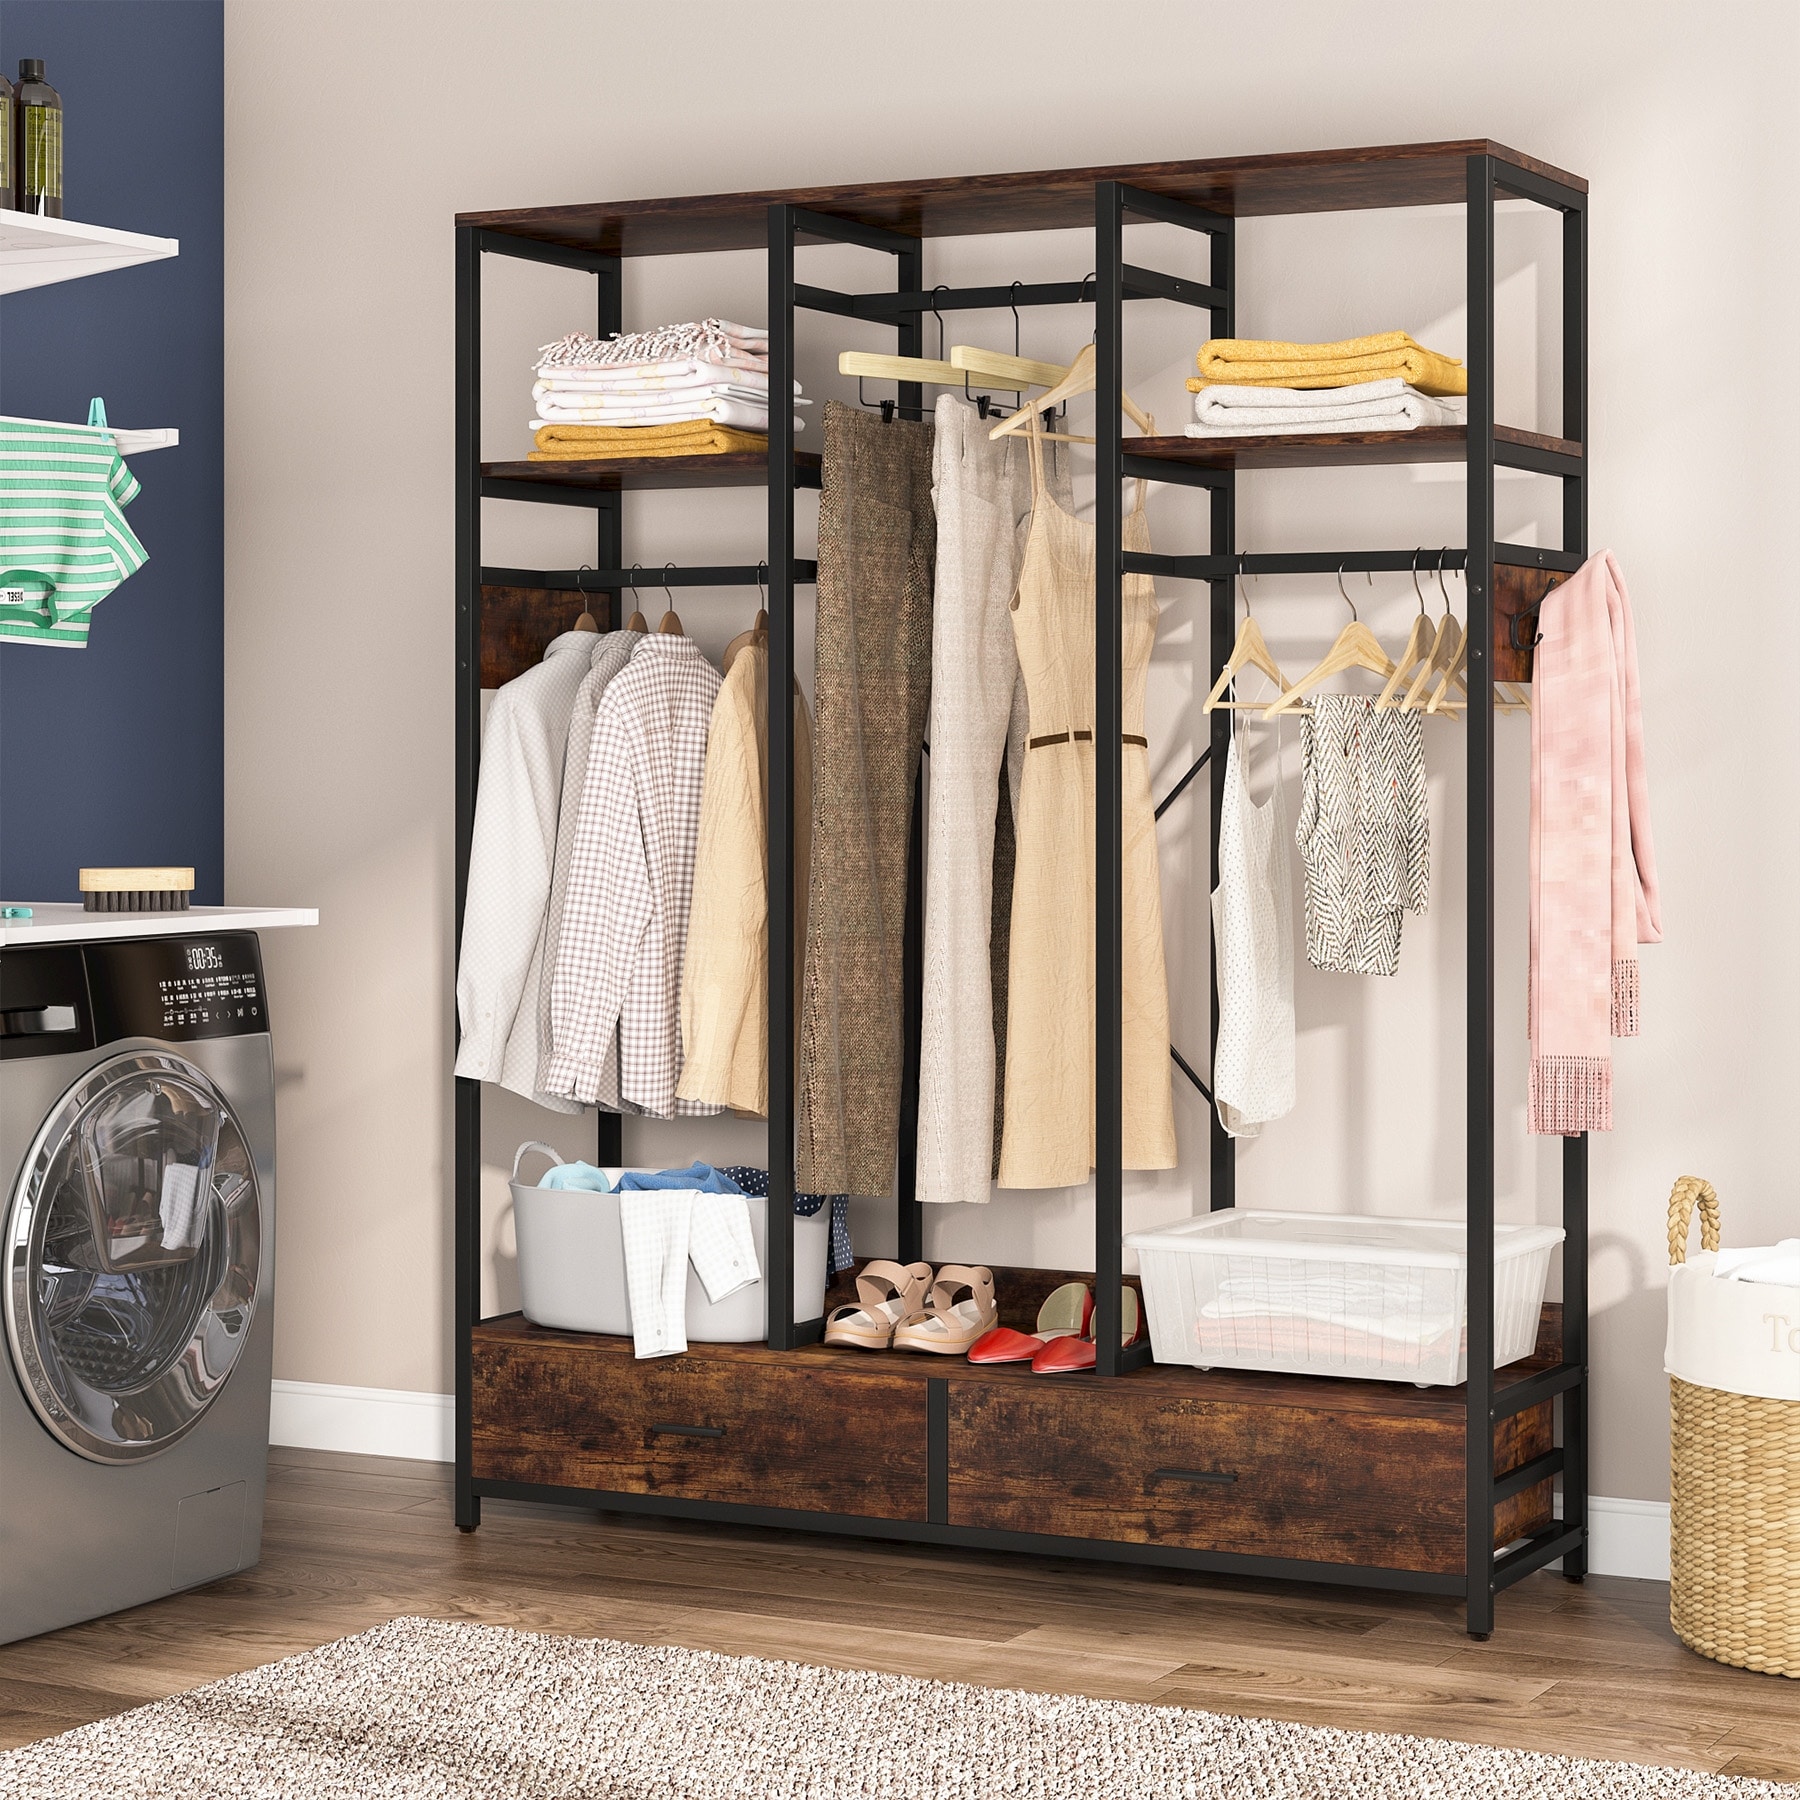 https://ak1.ostkcdn.com/images/products/is/images/direct/31cf7d57496b227003d14ac7c4ebc220ab27429e/Freestanding-Closet-Organizer-with-Drawers-and-Hanging-Rod-Clothes-Garment-Rack-Organizer.jpg